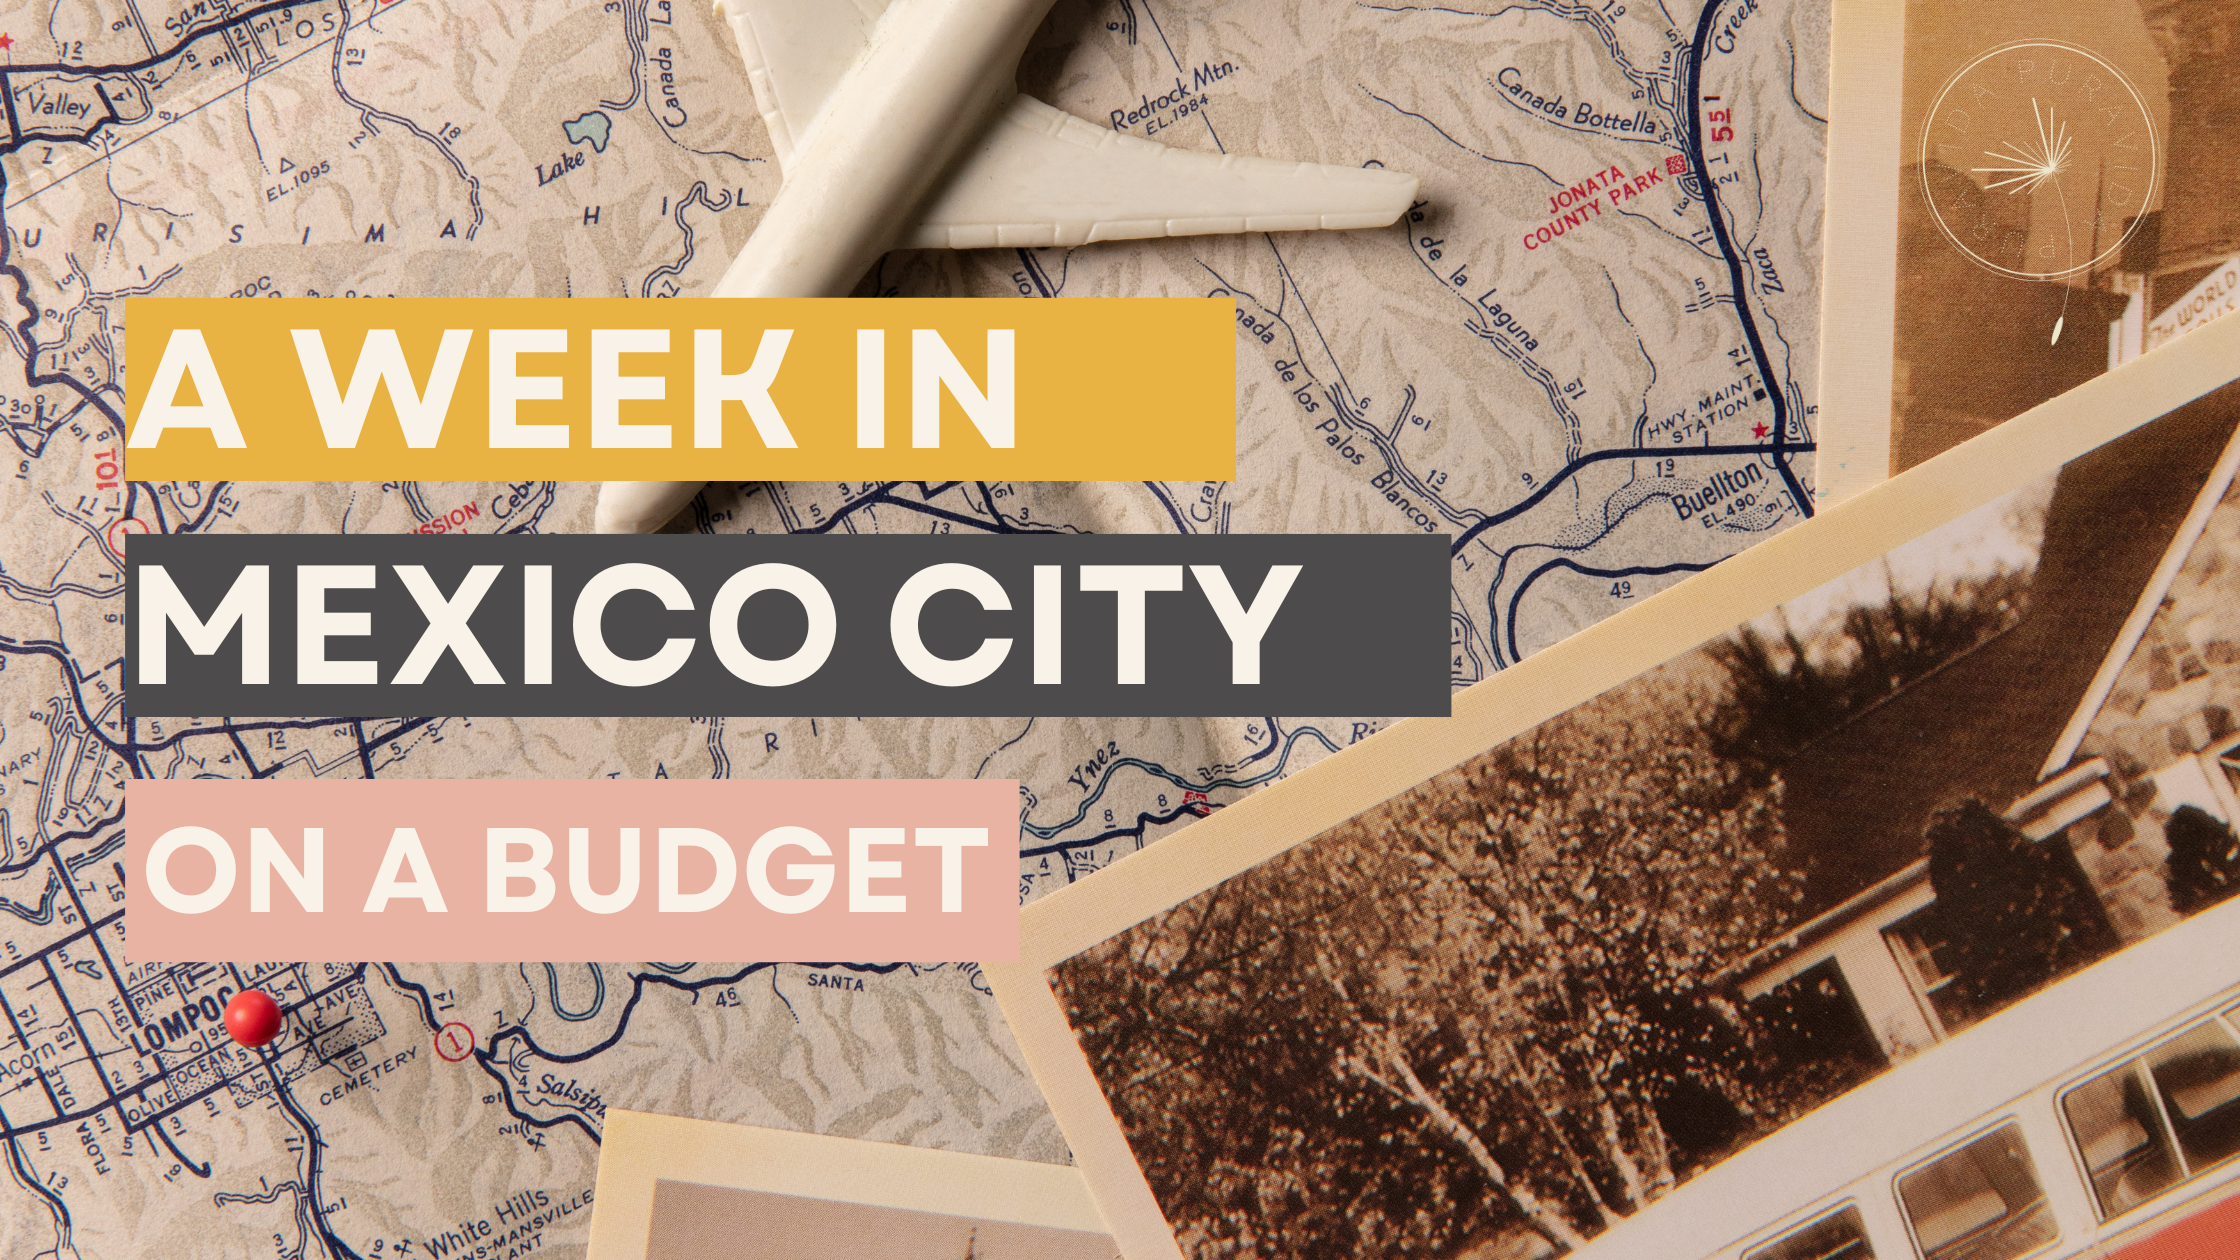 How to Spend a Week in Mexico City on a Budget